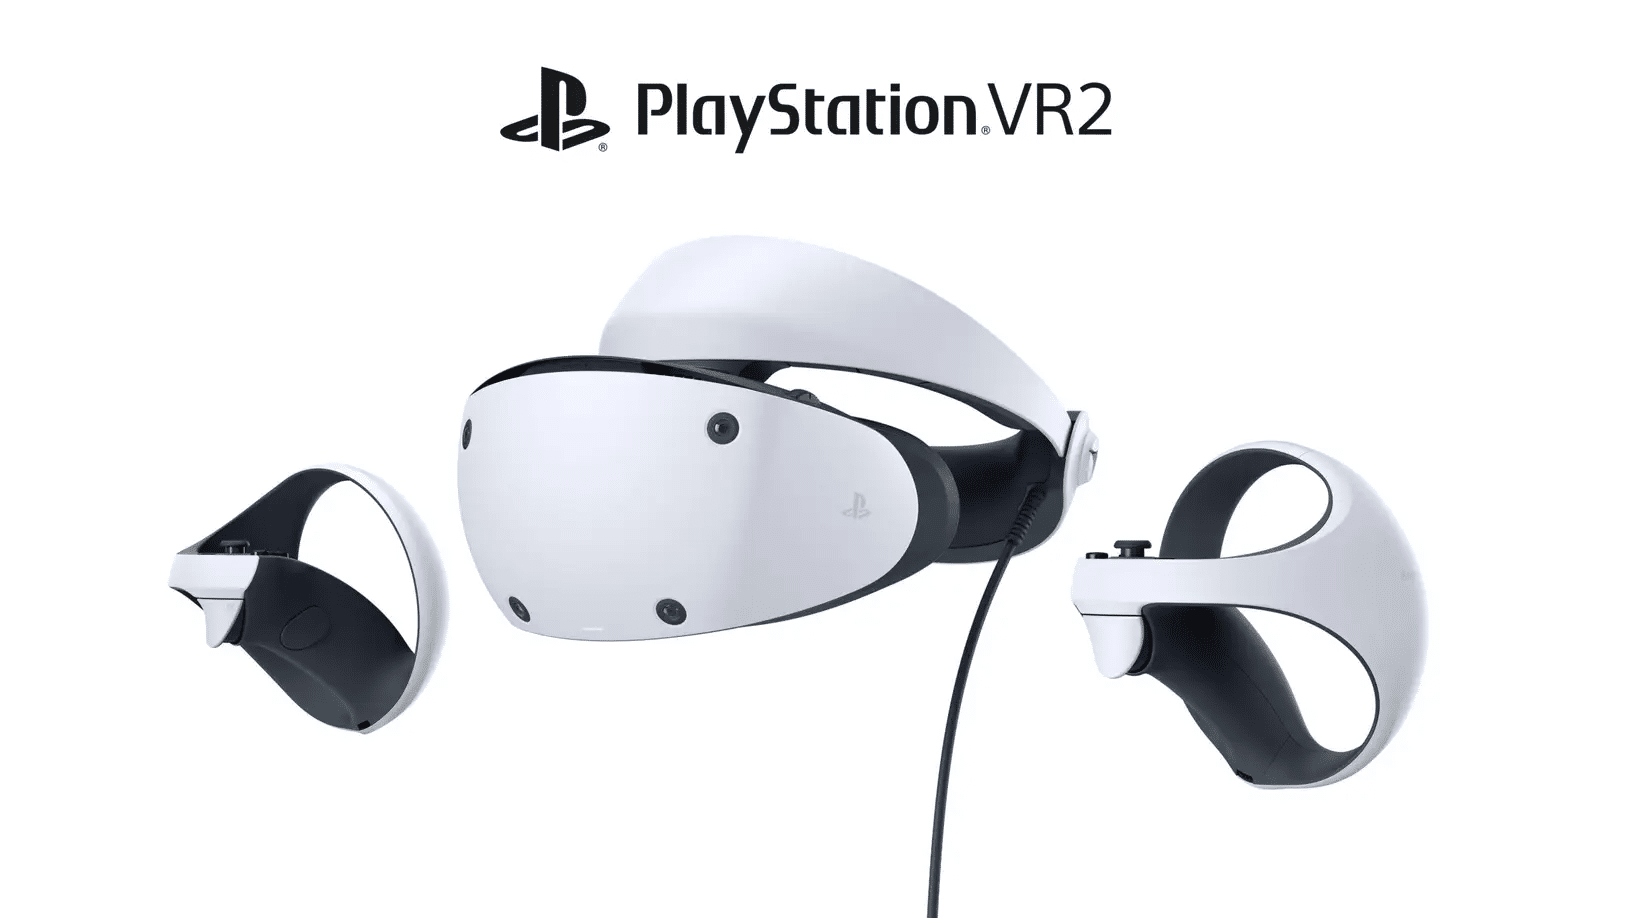 What You Need To Know About The PSVR Working On PS5